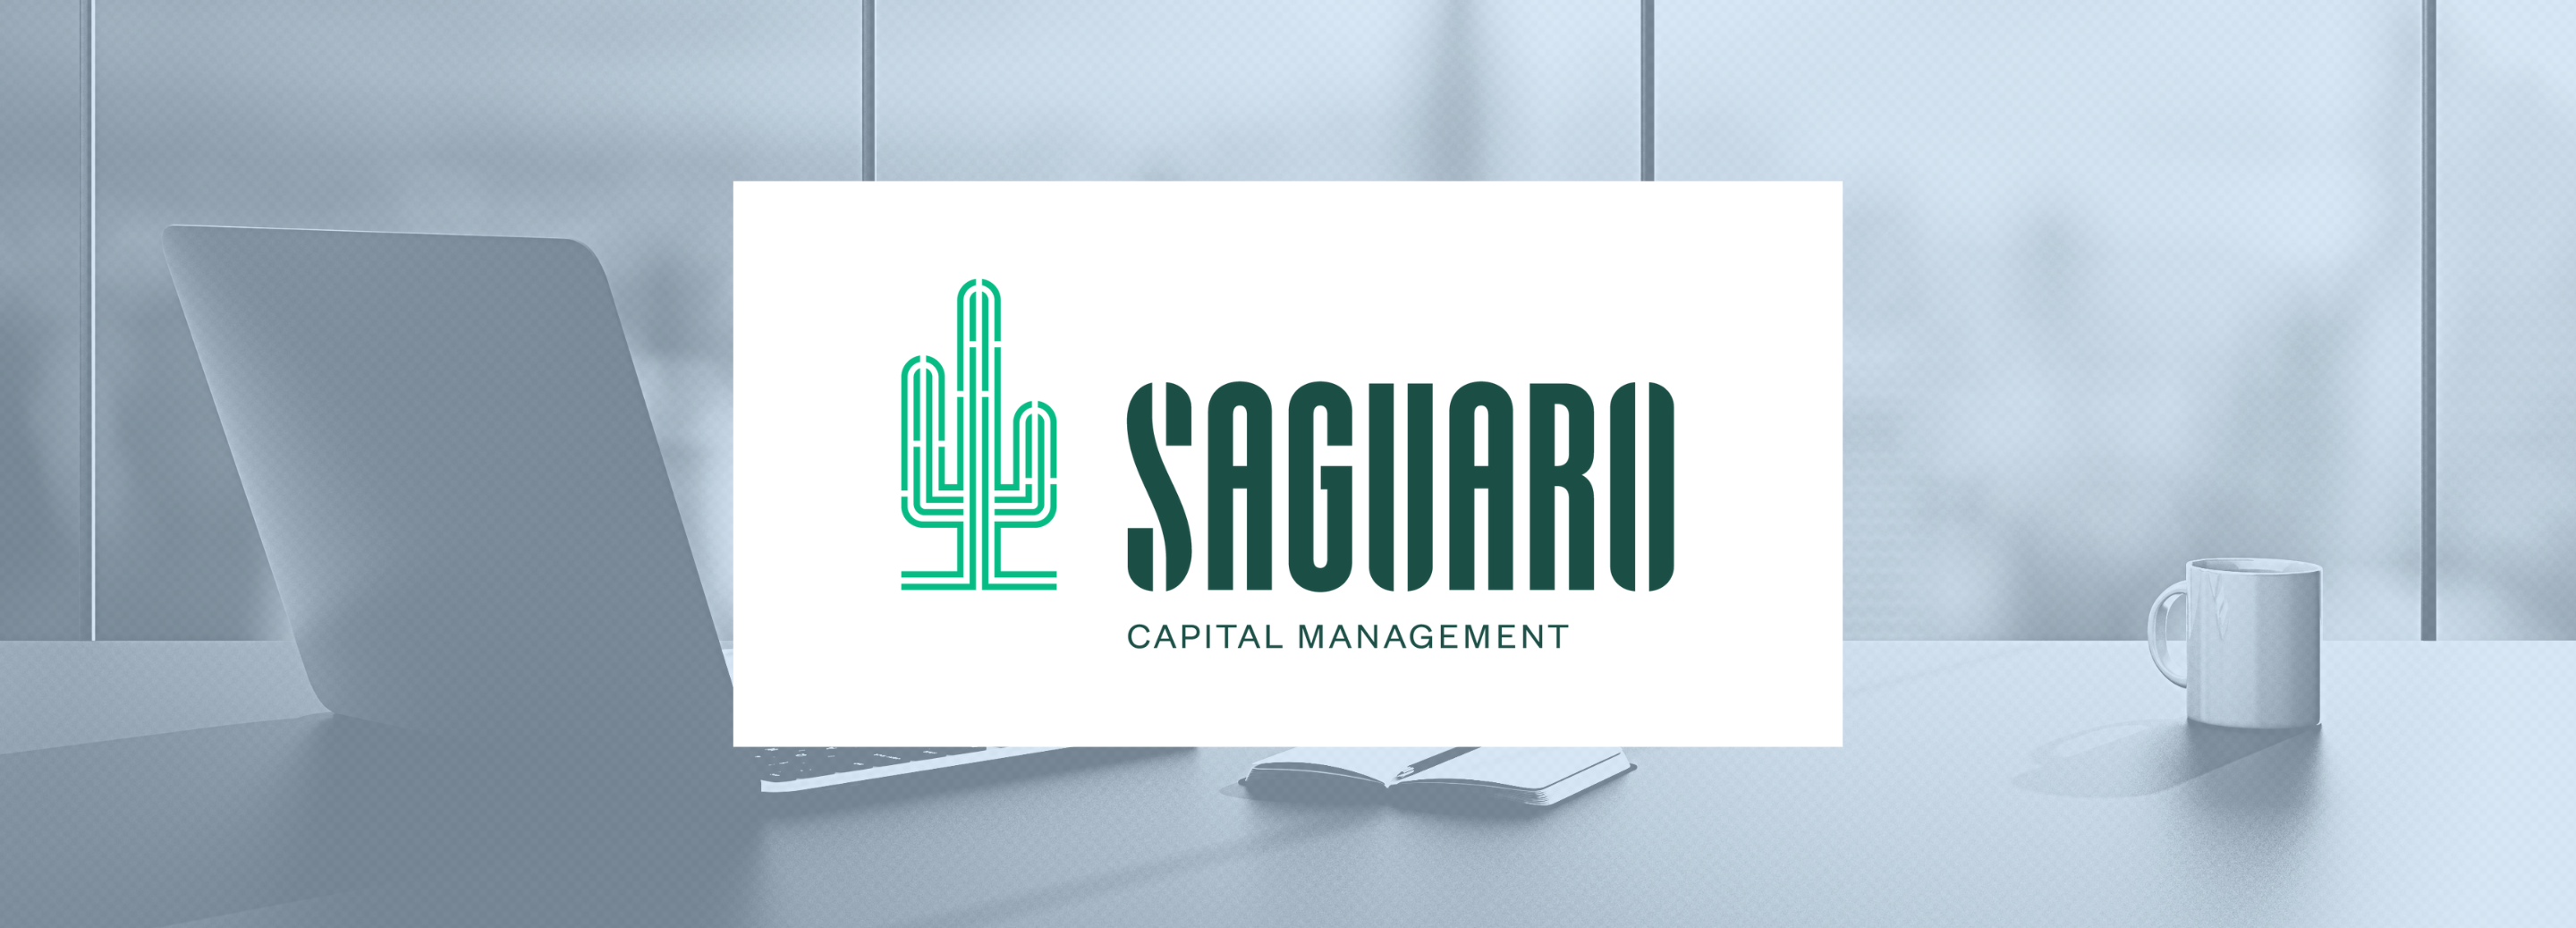 Value Investment Firm Saguaro Capital Management Launches